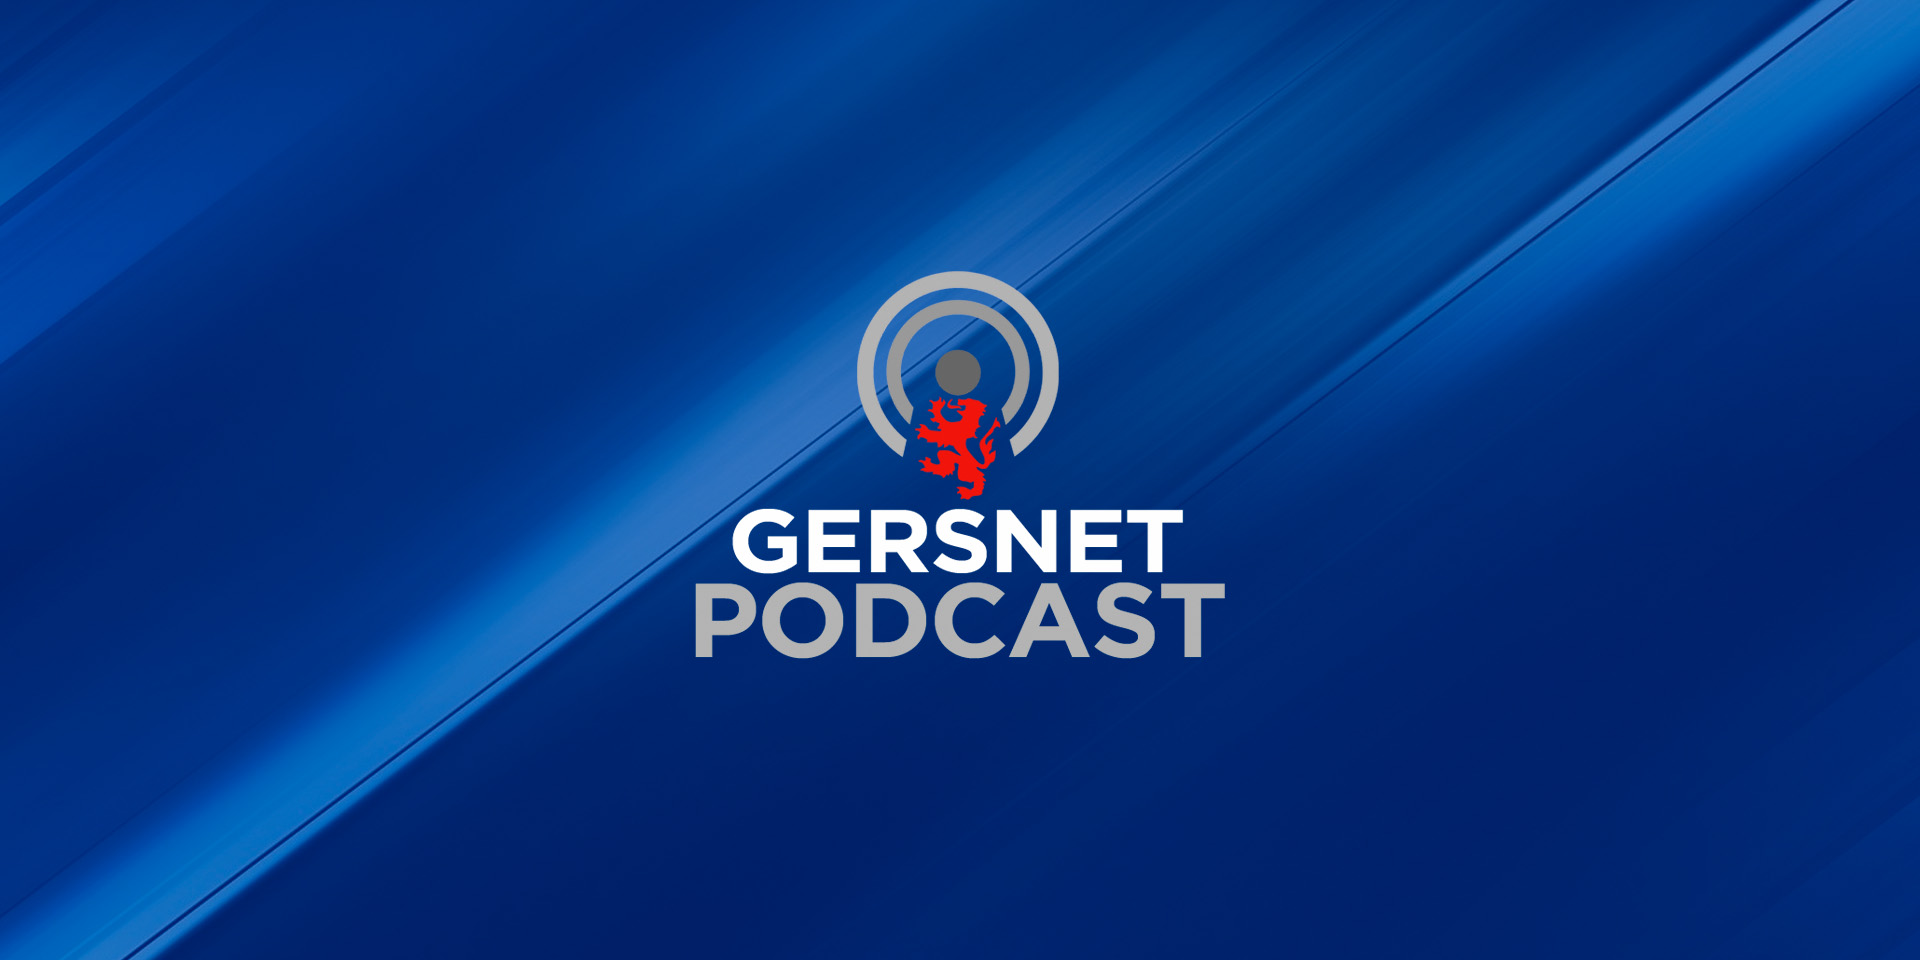 Gersnet Podcast 332 - Sneaking past the Saints